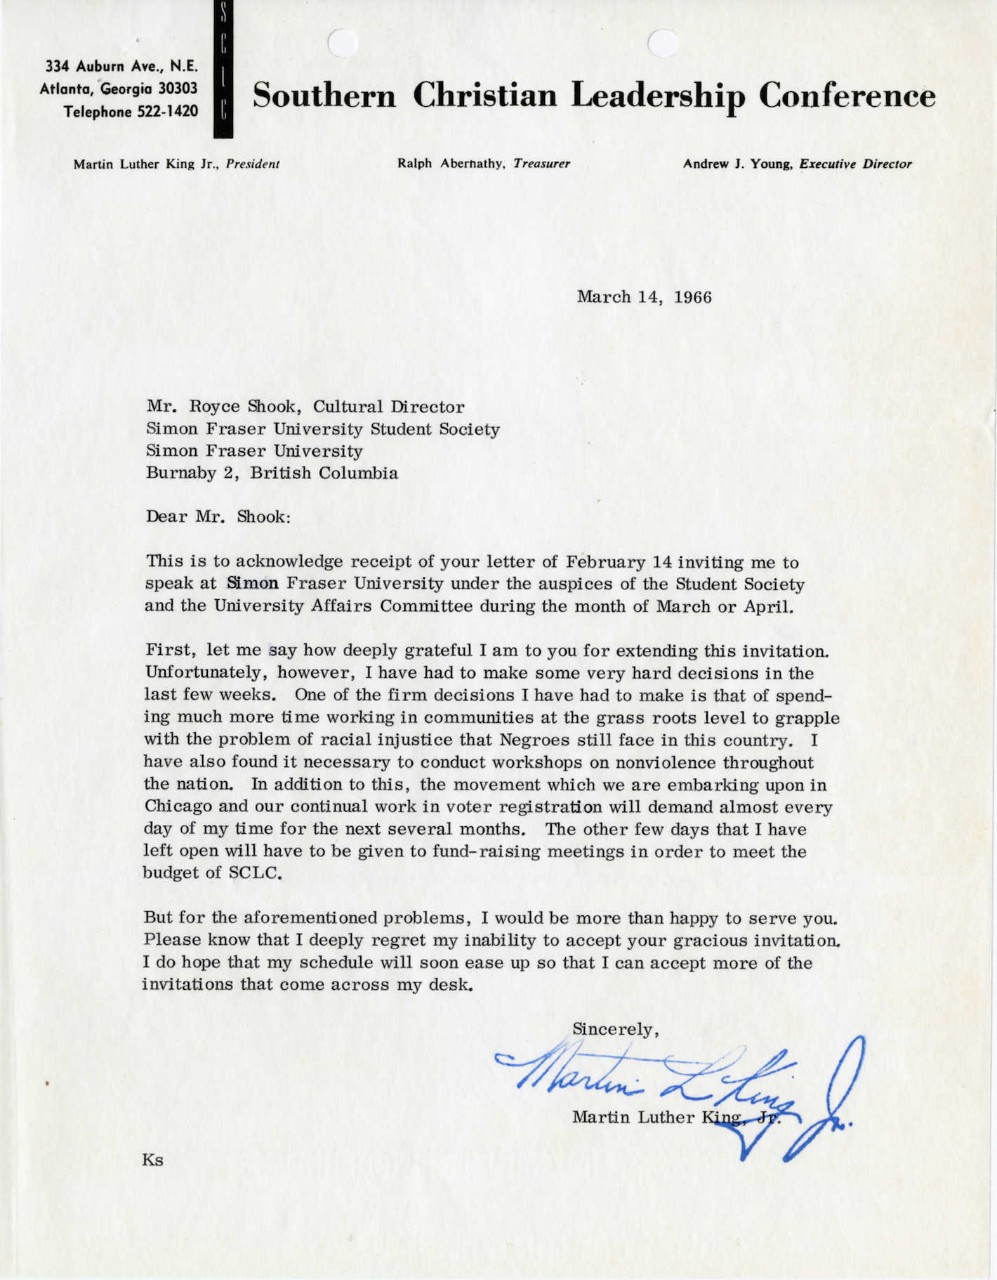 Martin Luther King Jr. letter to the SFU Student Society